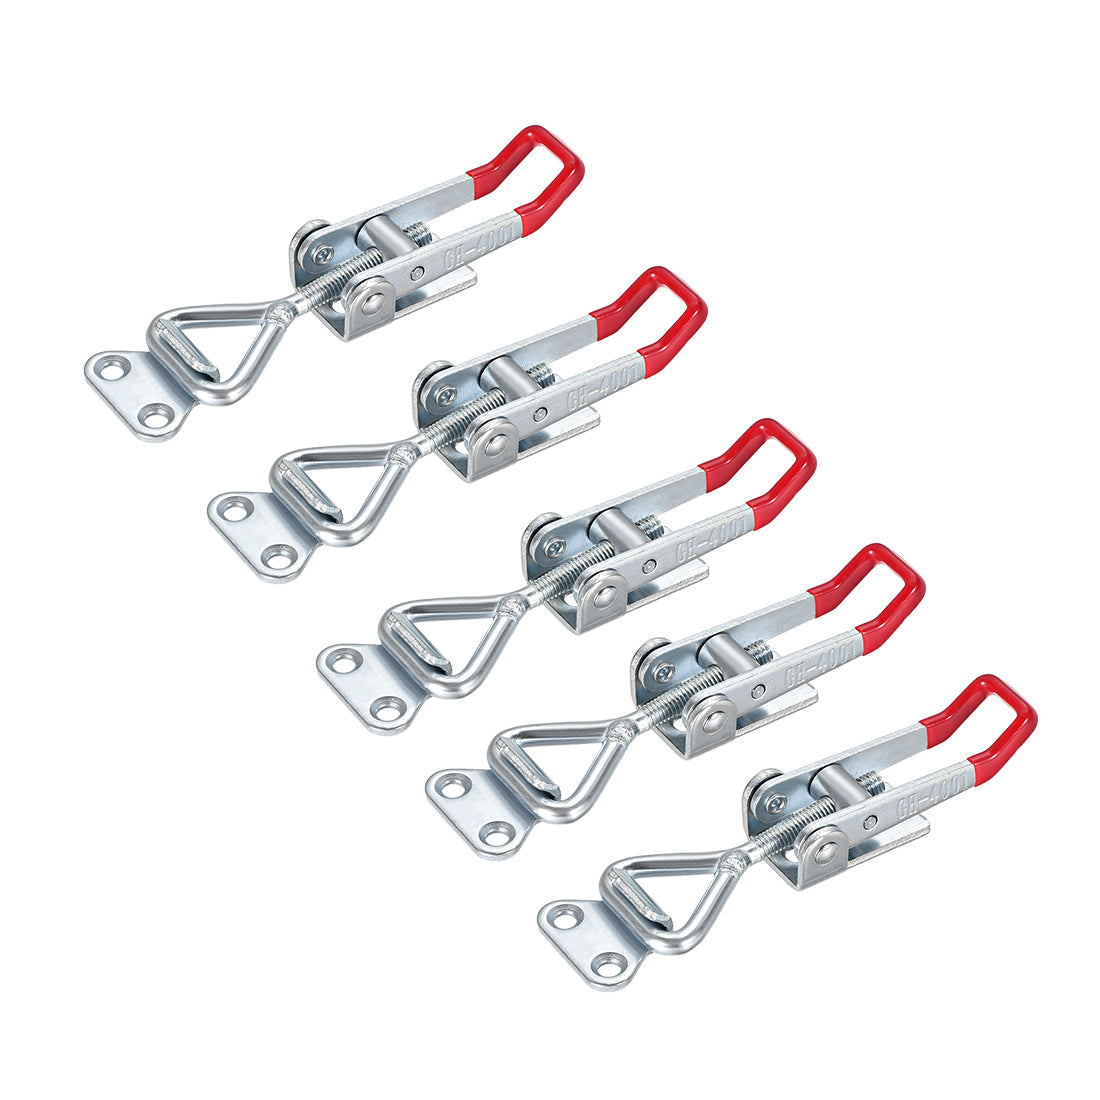 uxcell Uxcell 5 Pcs Hand Tool Latch Action Toggle Clamp Quick Release Clamp 330 lbs/150kg Holding Capacity